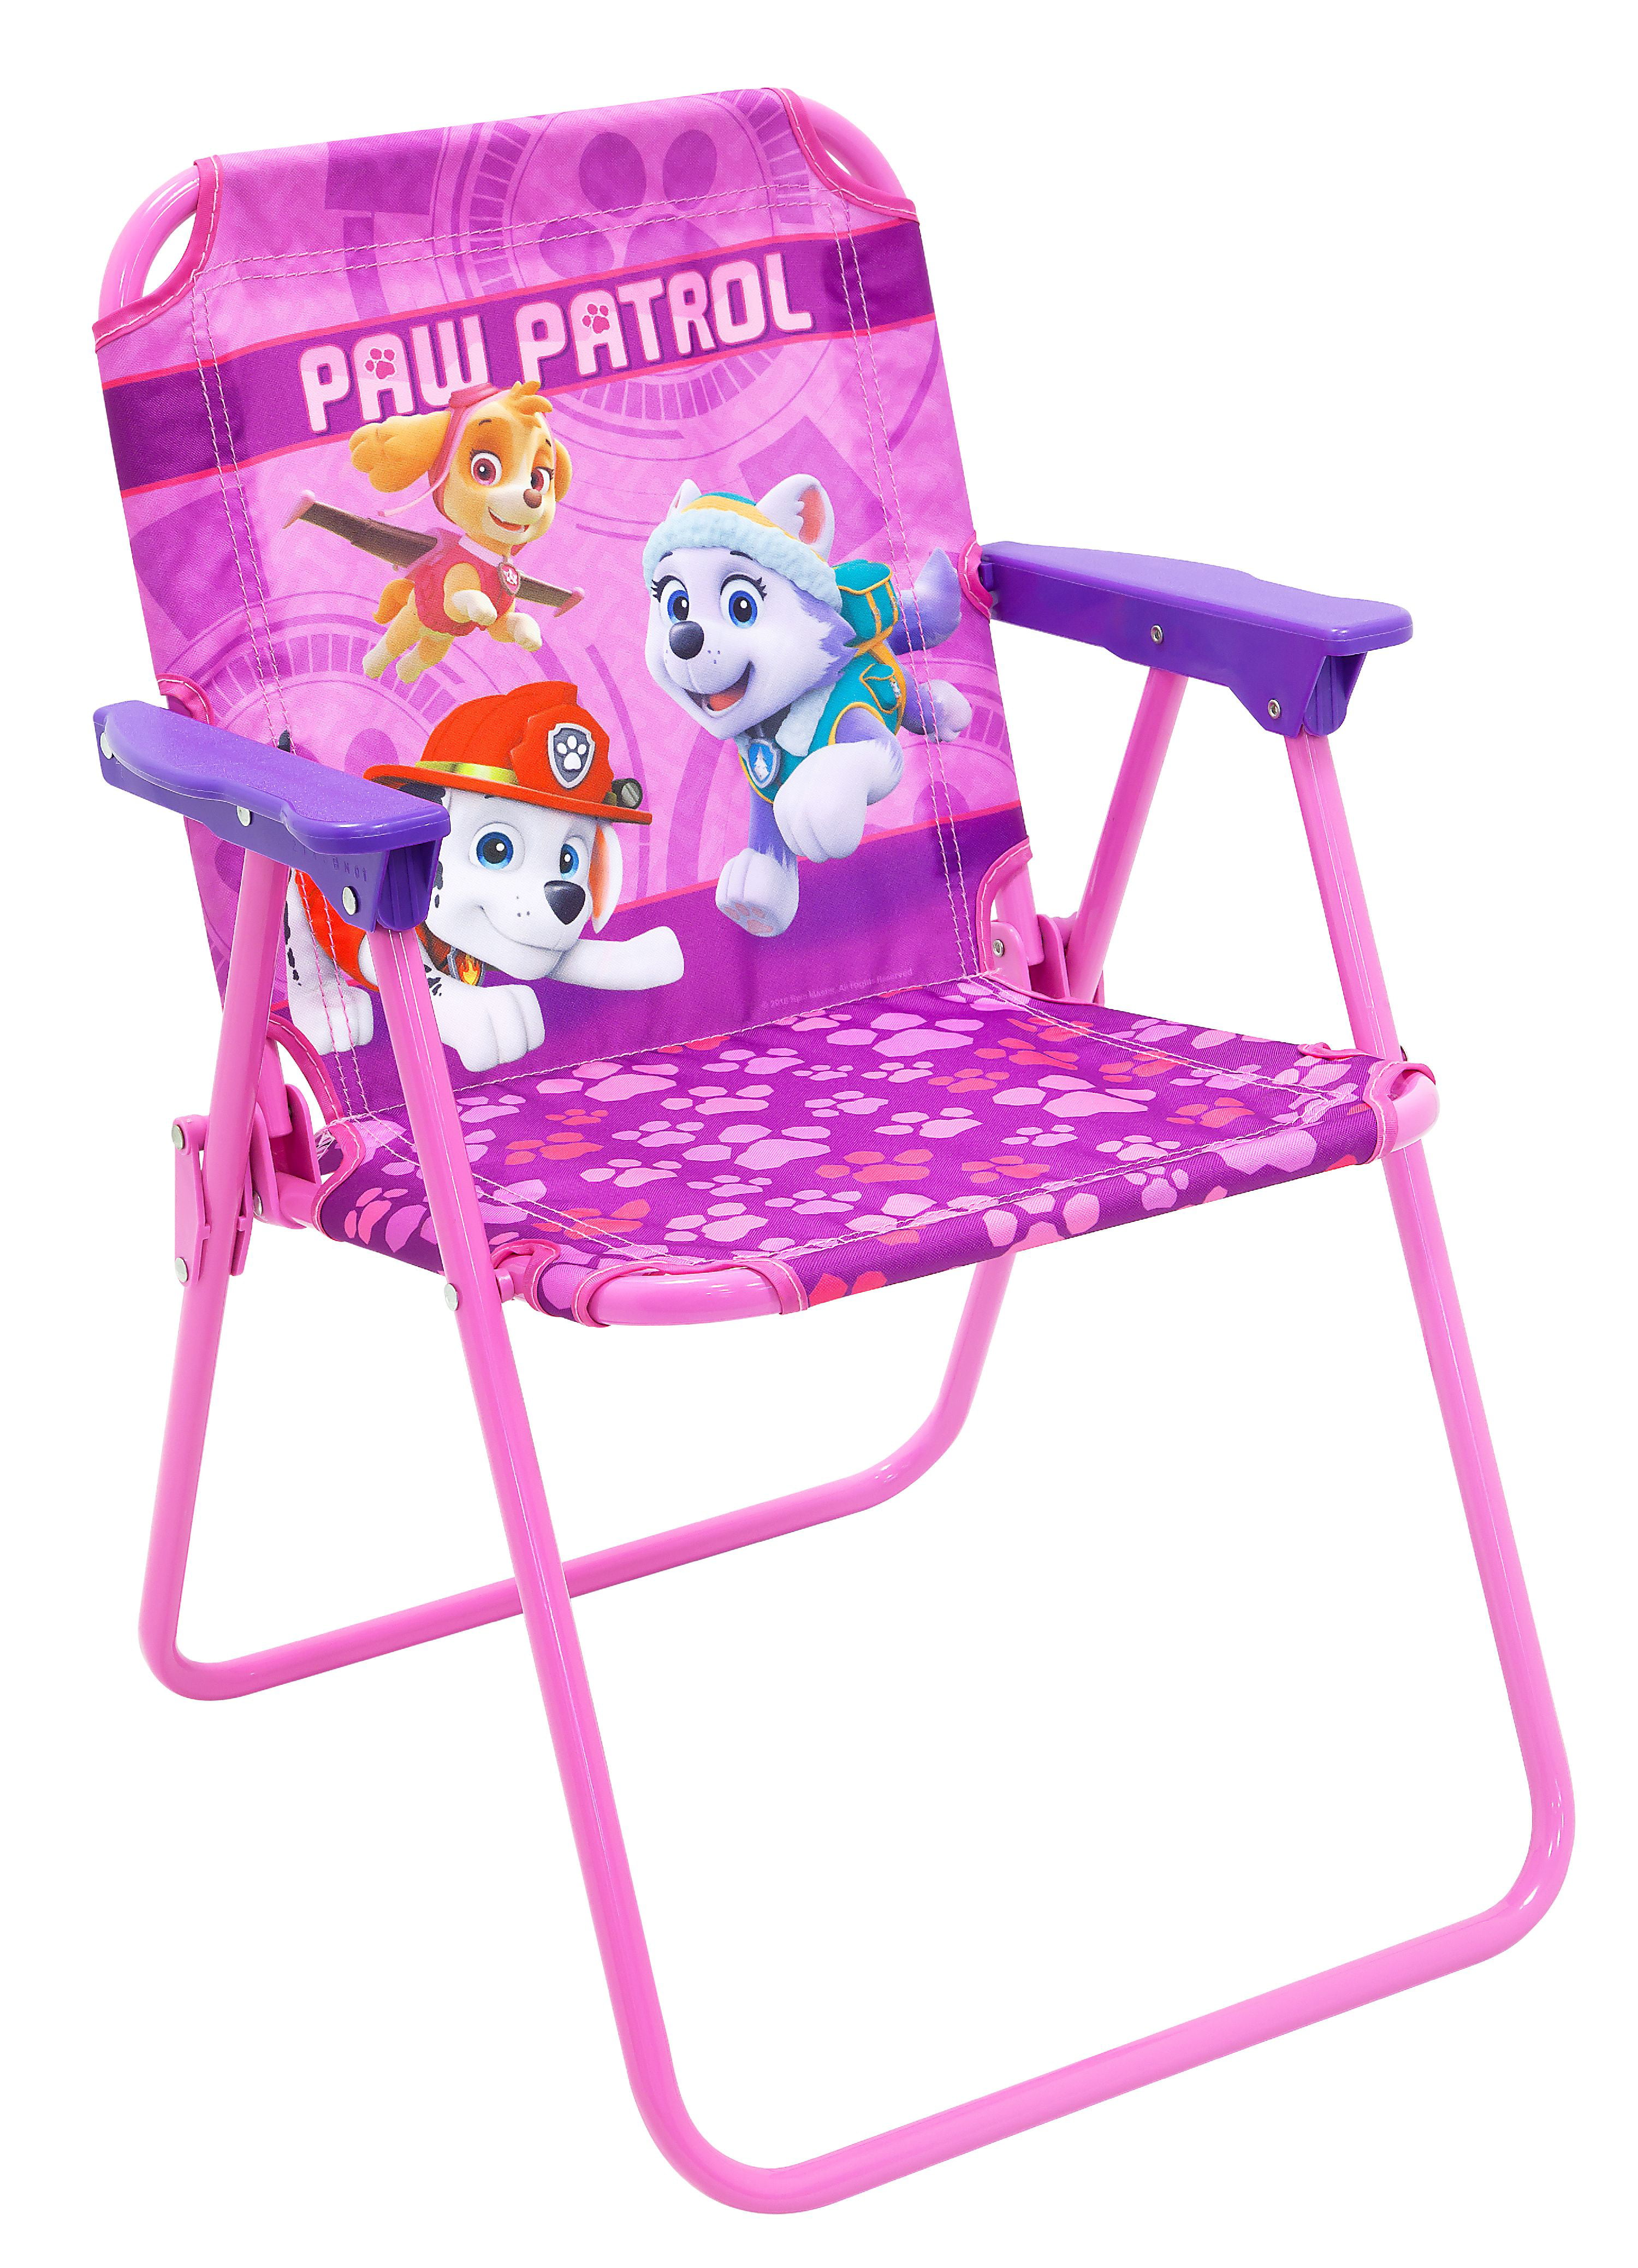 New comfortable Paw Patrol Chair suitable for use both indoor and outdoor PINK 